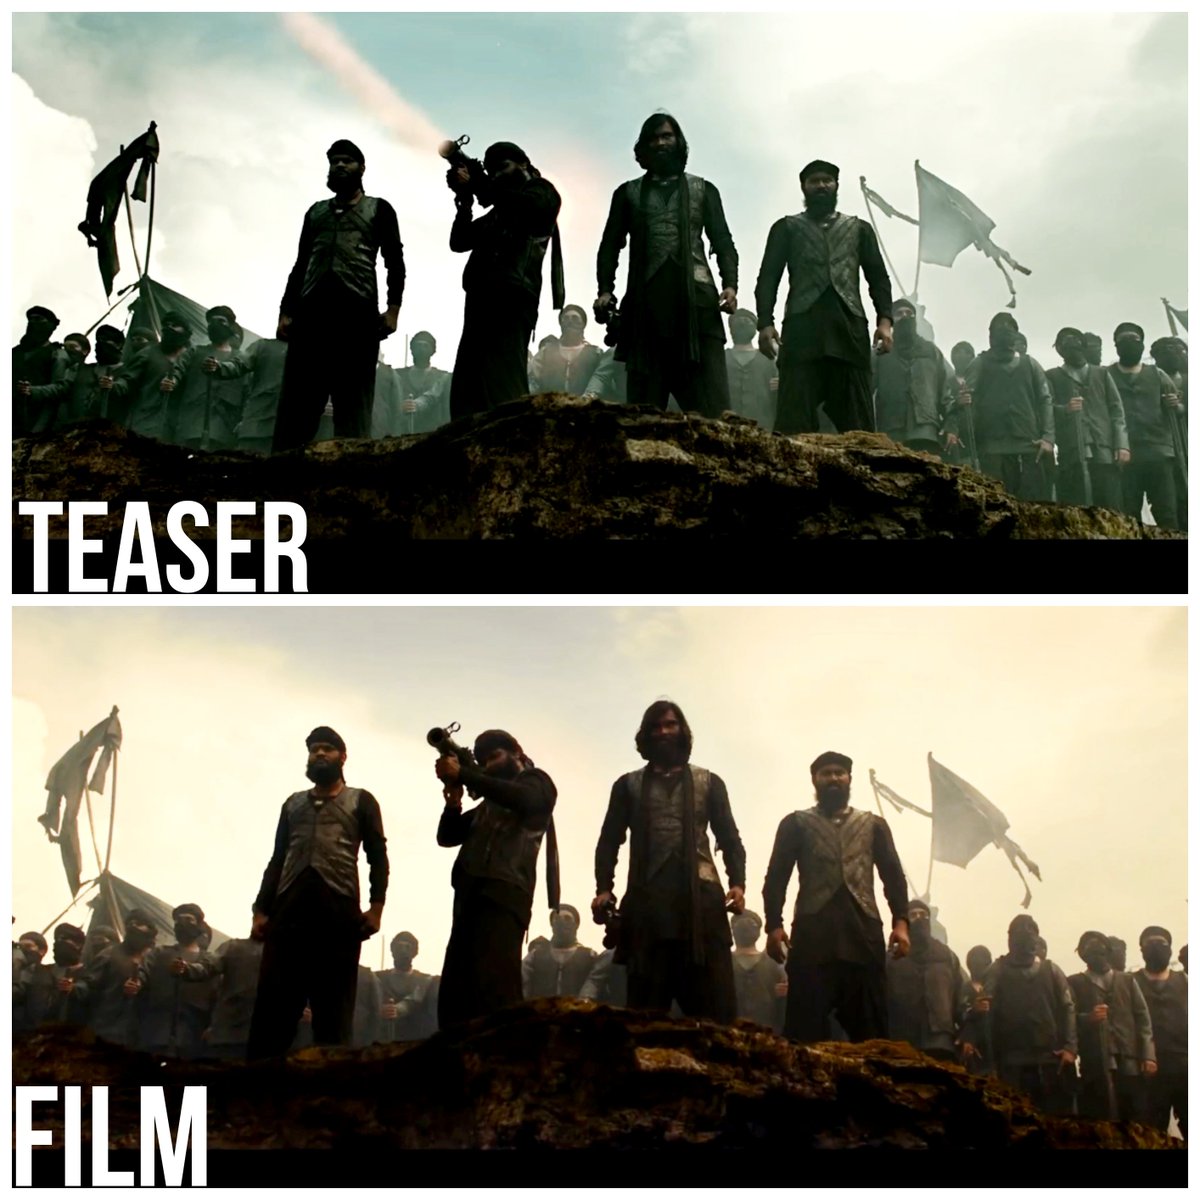 I mean it's artistic choice still which grading do you prefer ? 

#KGF2